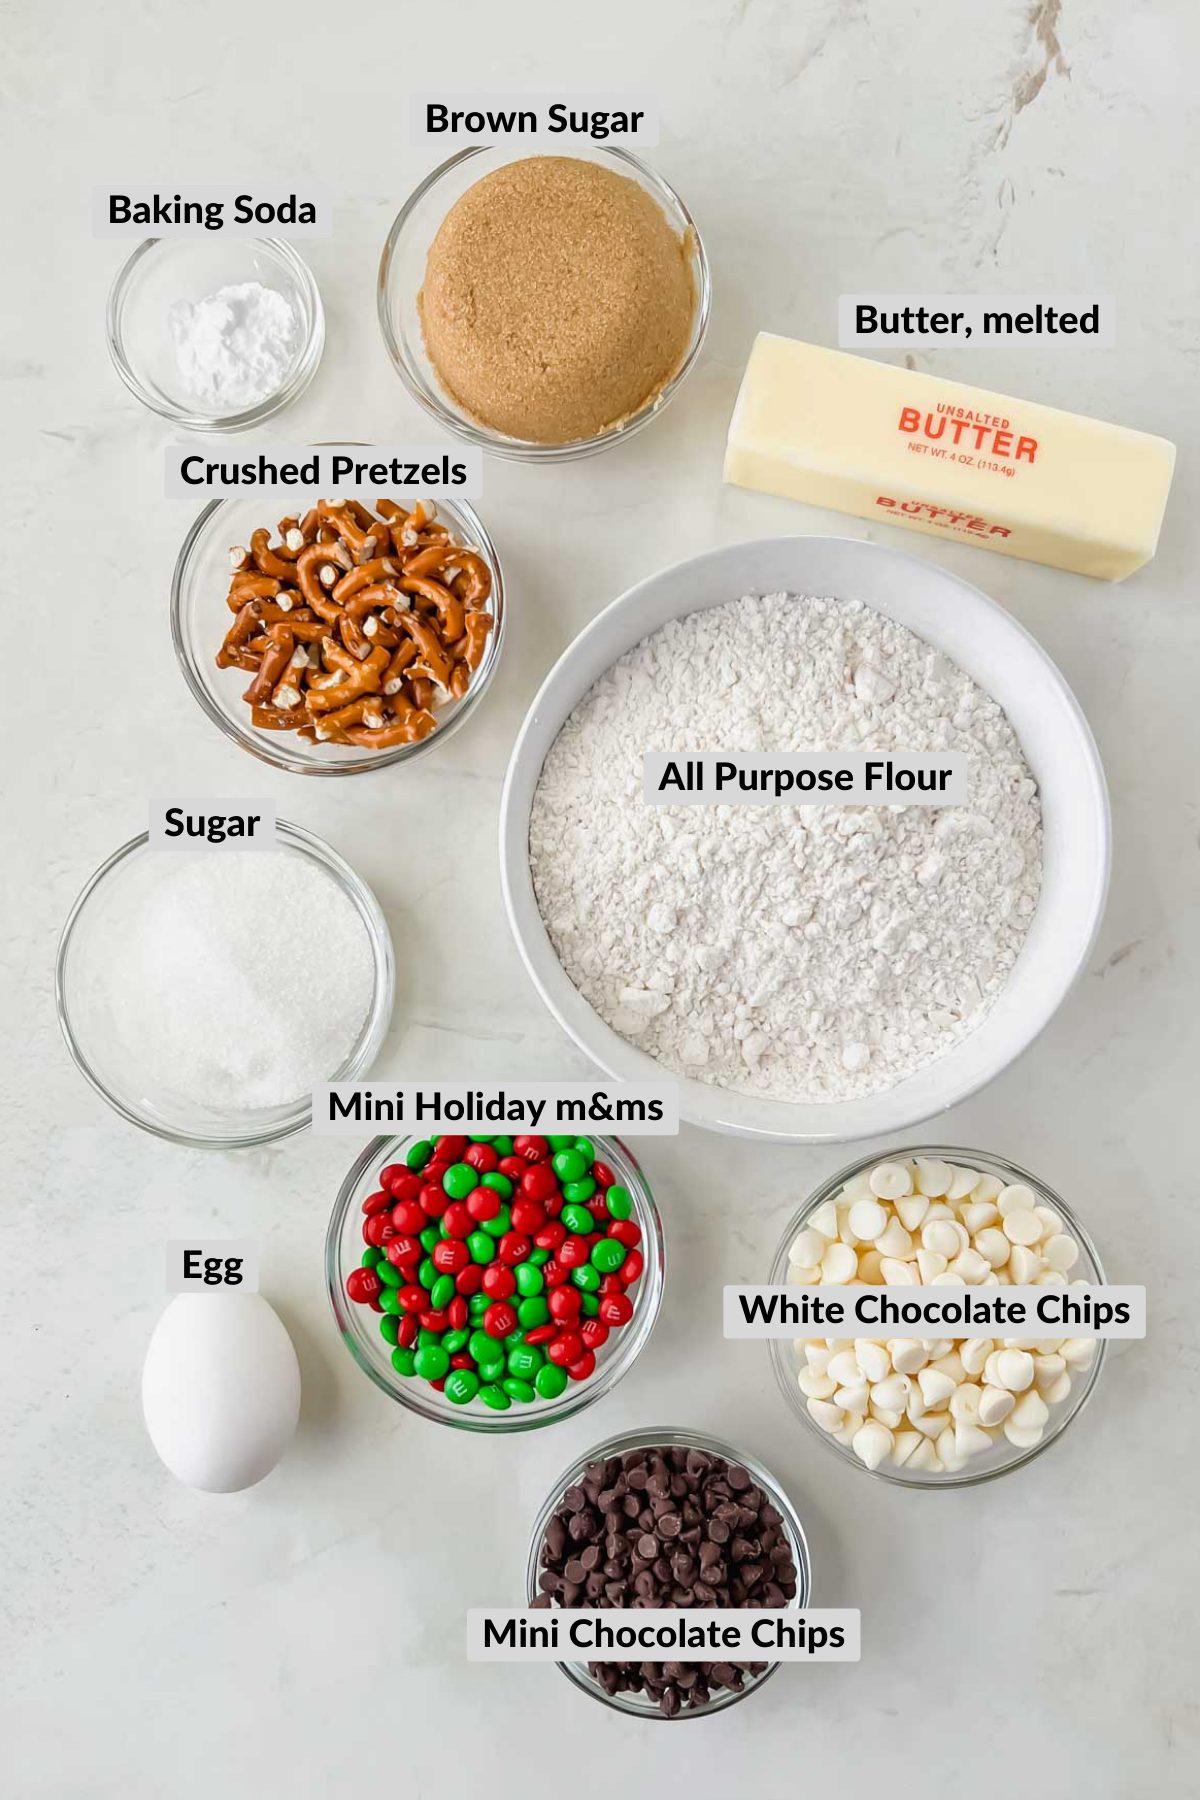 ingredients for baked kitchen sink christmas cookies on white background.